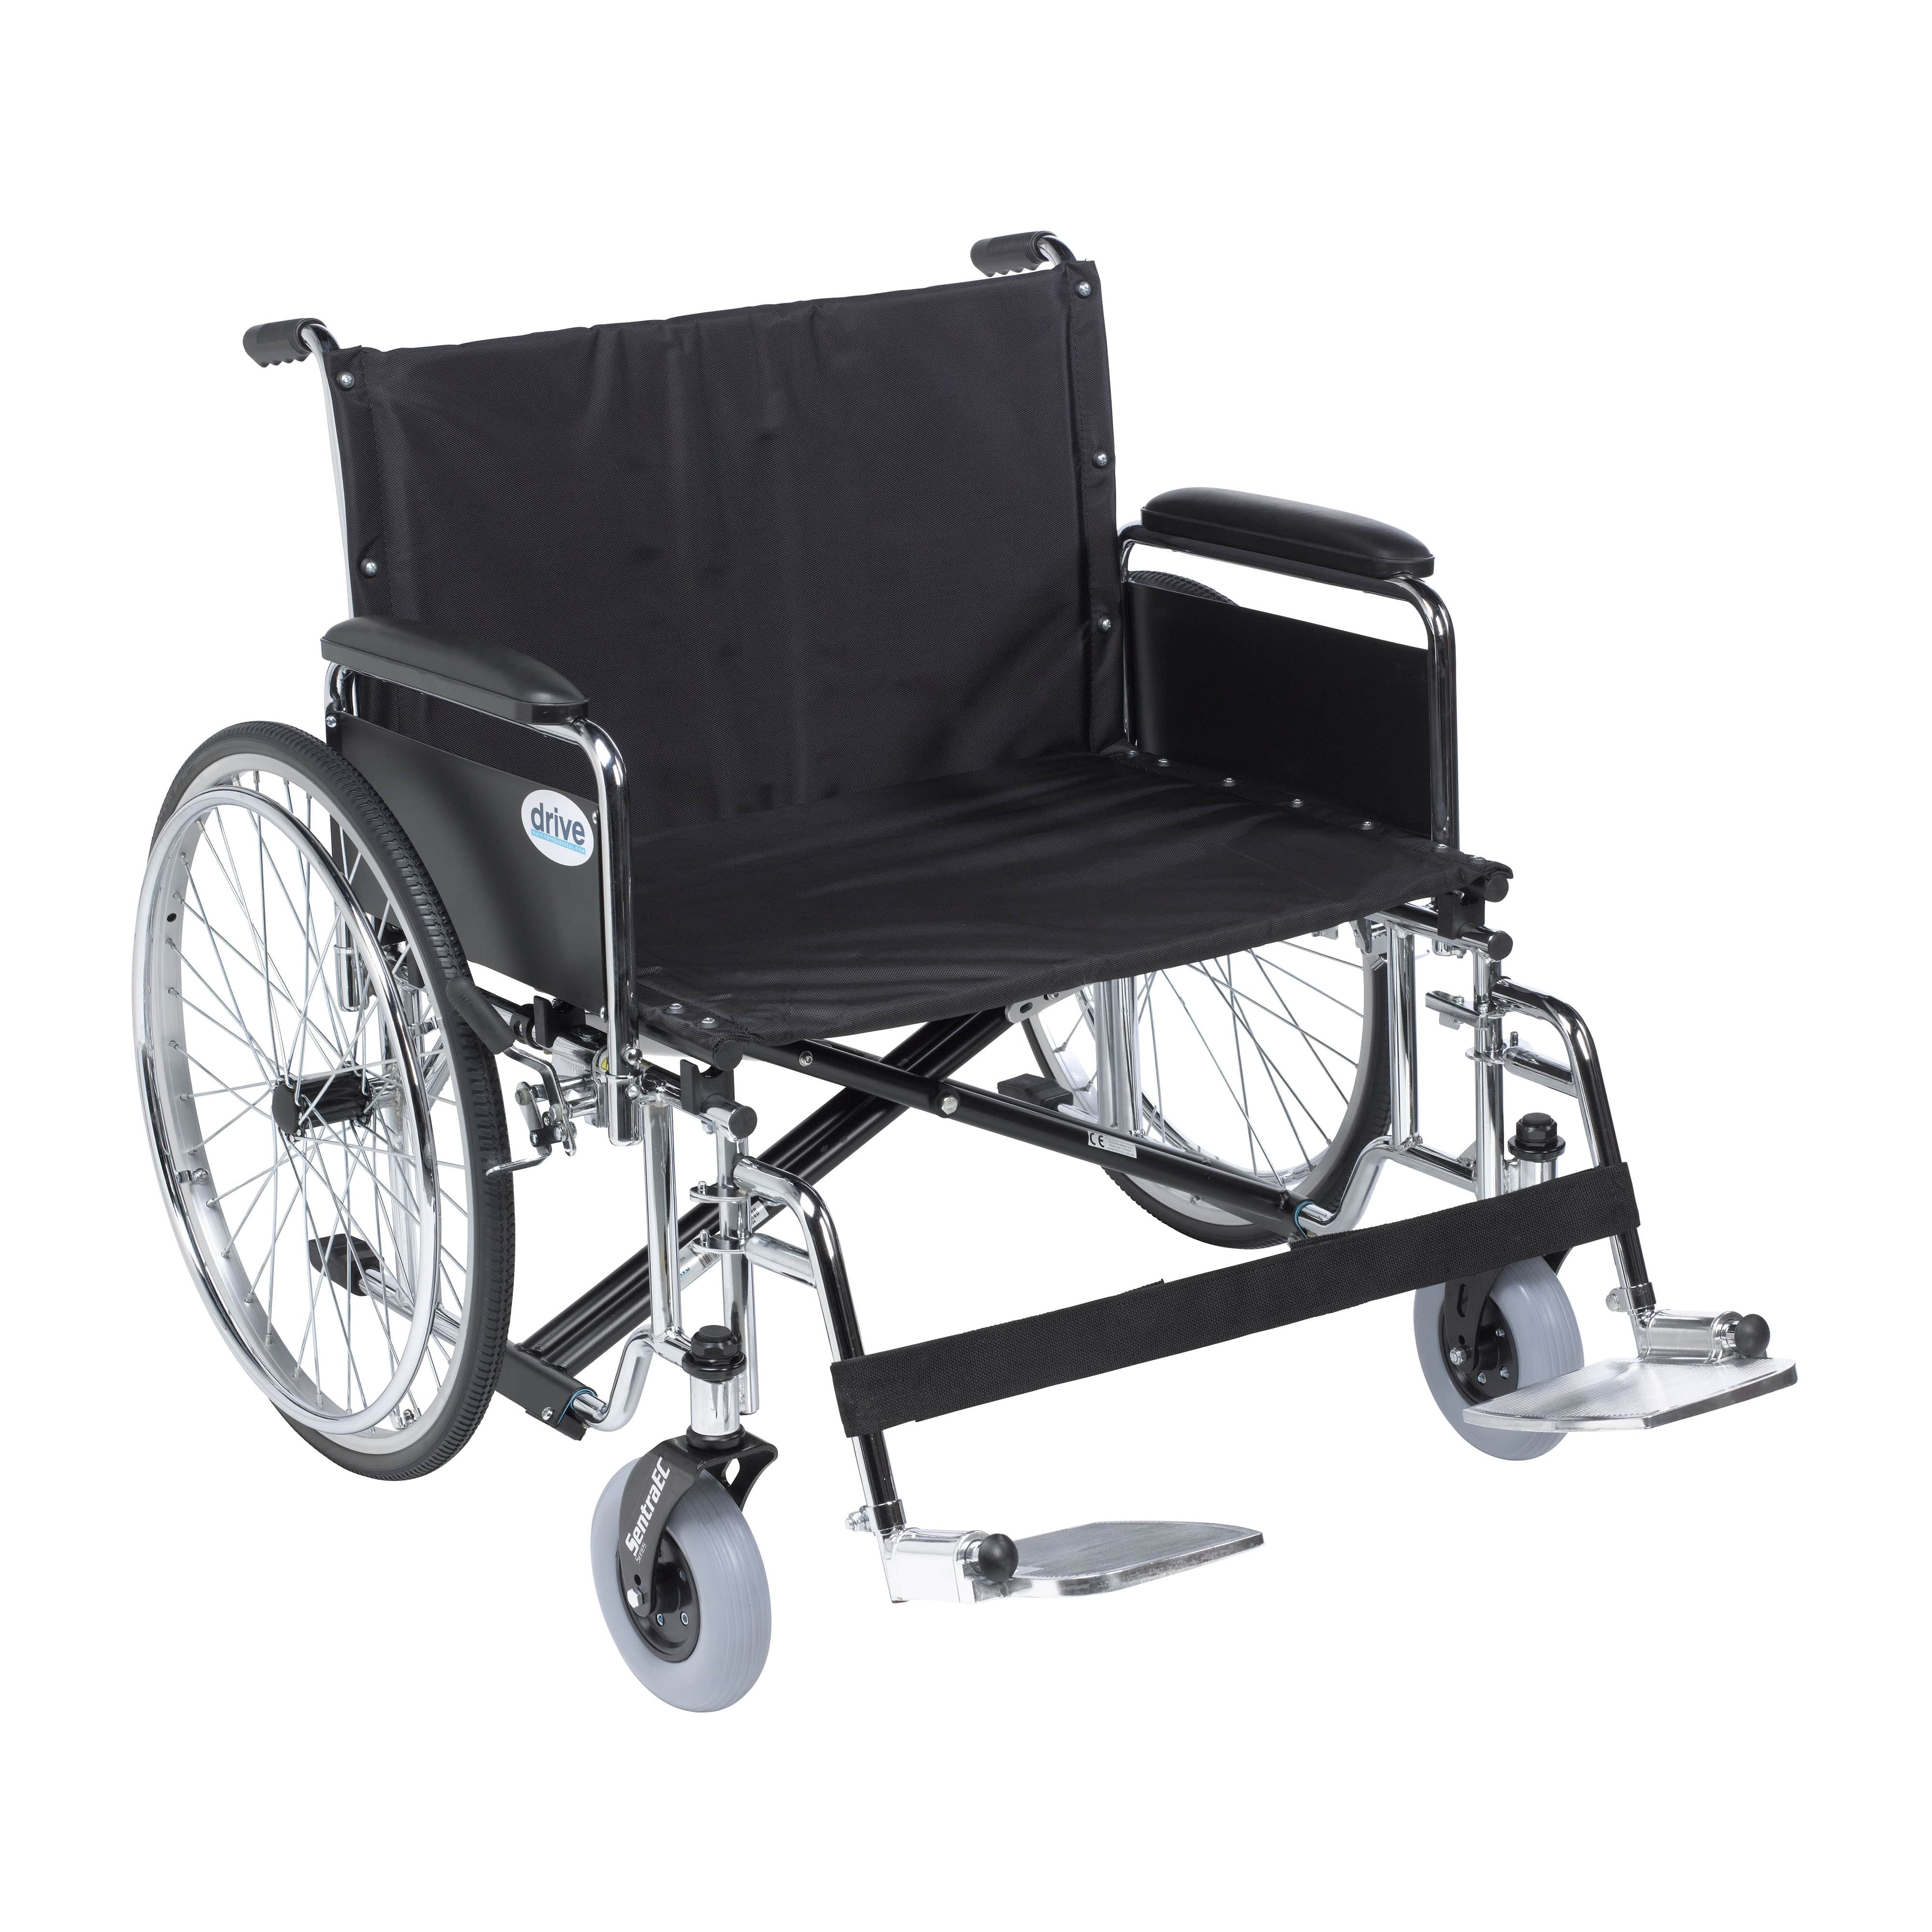 Drive Medical Wheelchairs/Heavy Duty Wheelchairs Detachable Full Arms and Swing Away Foot Rests / 26" Seat Drive Medical Sentra EC Heavy Duty Extra Wide Wheelchair